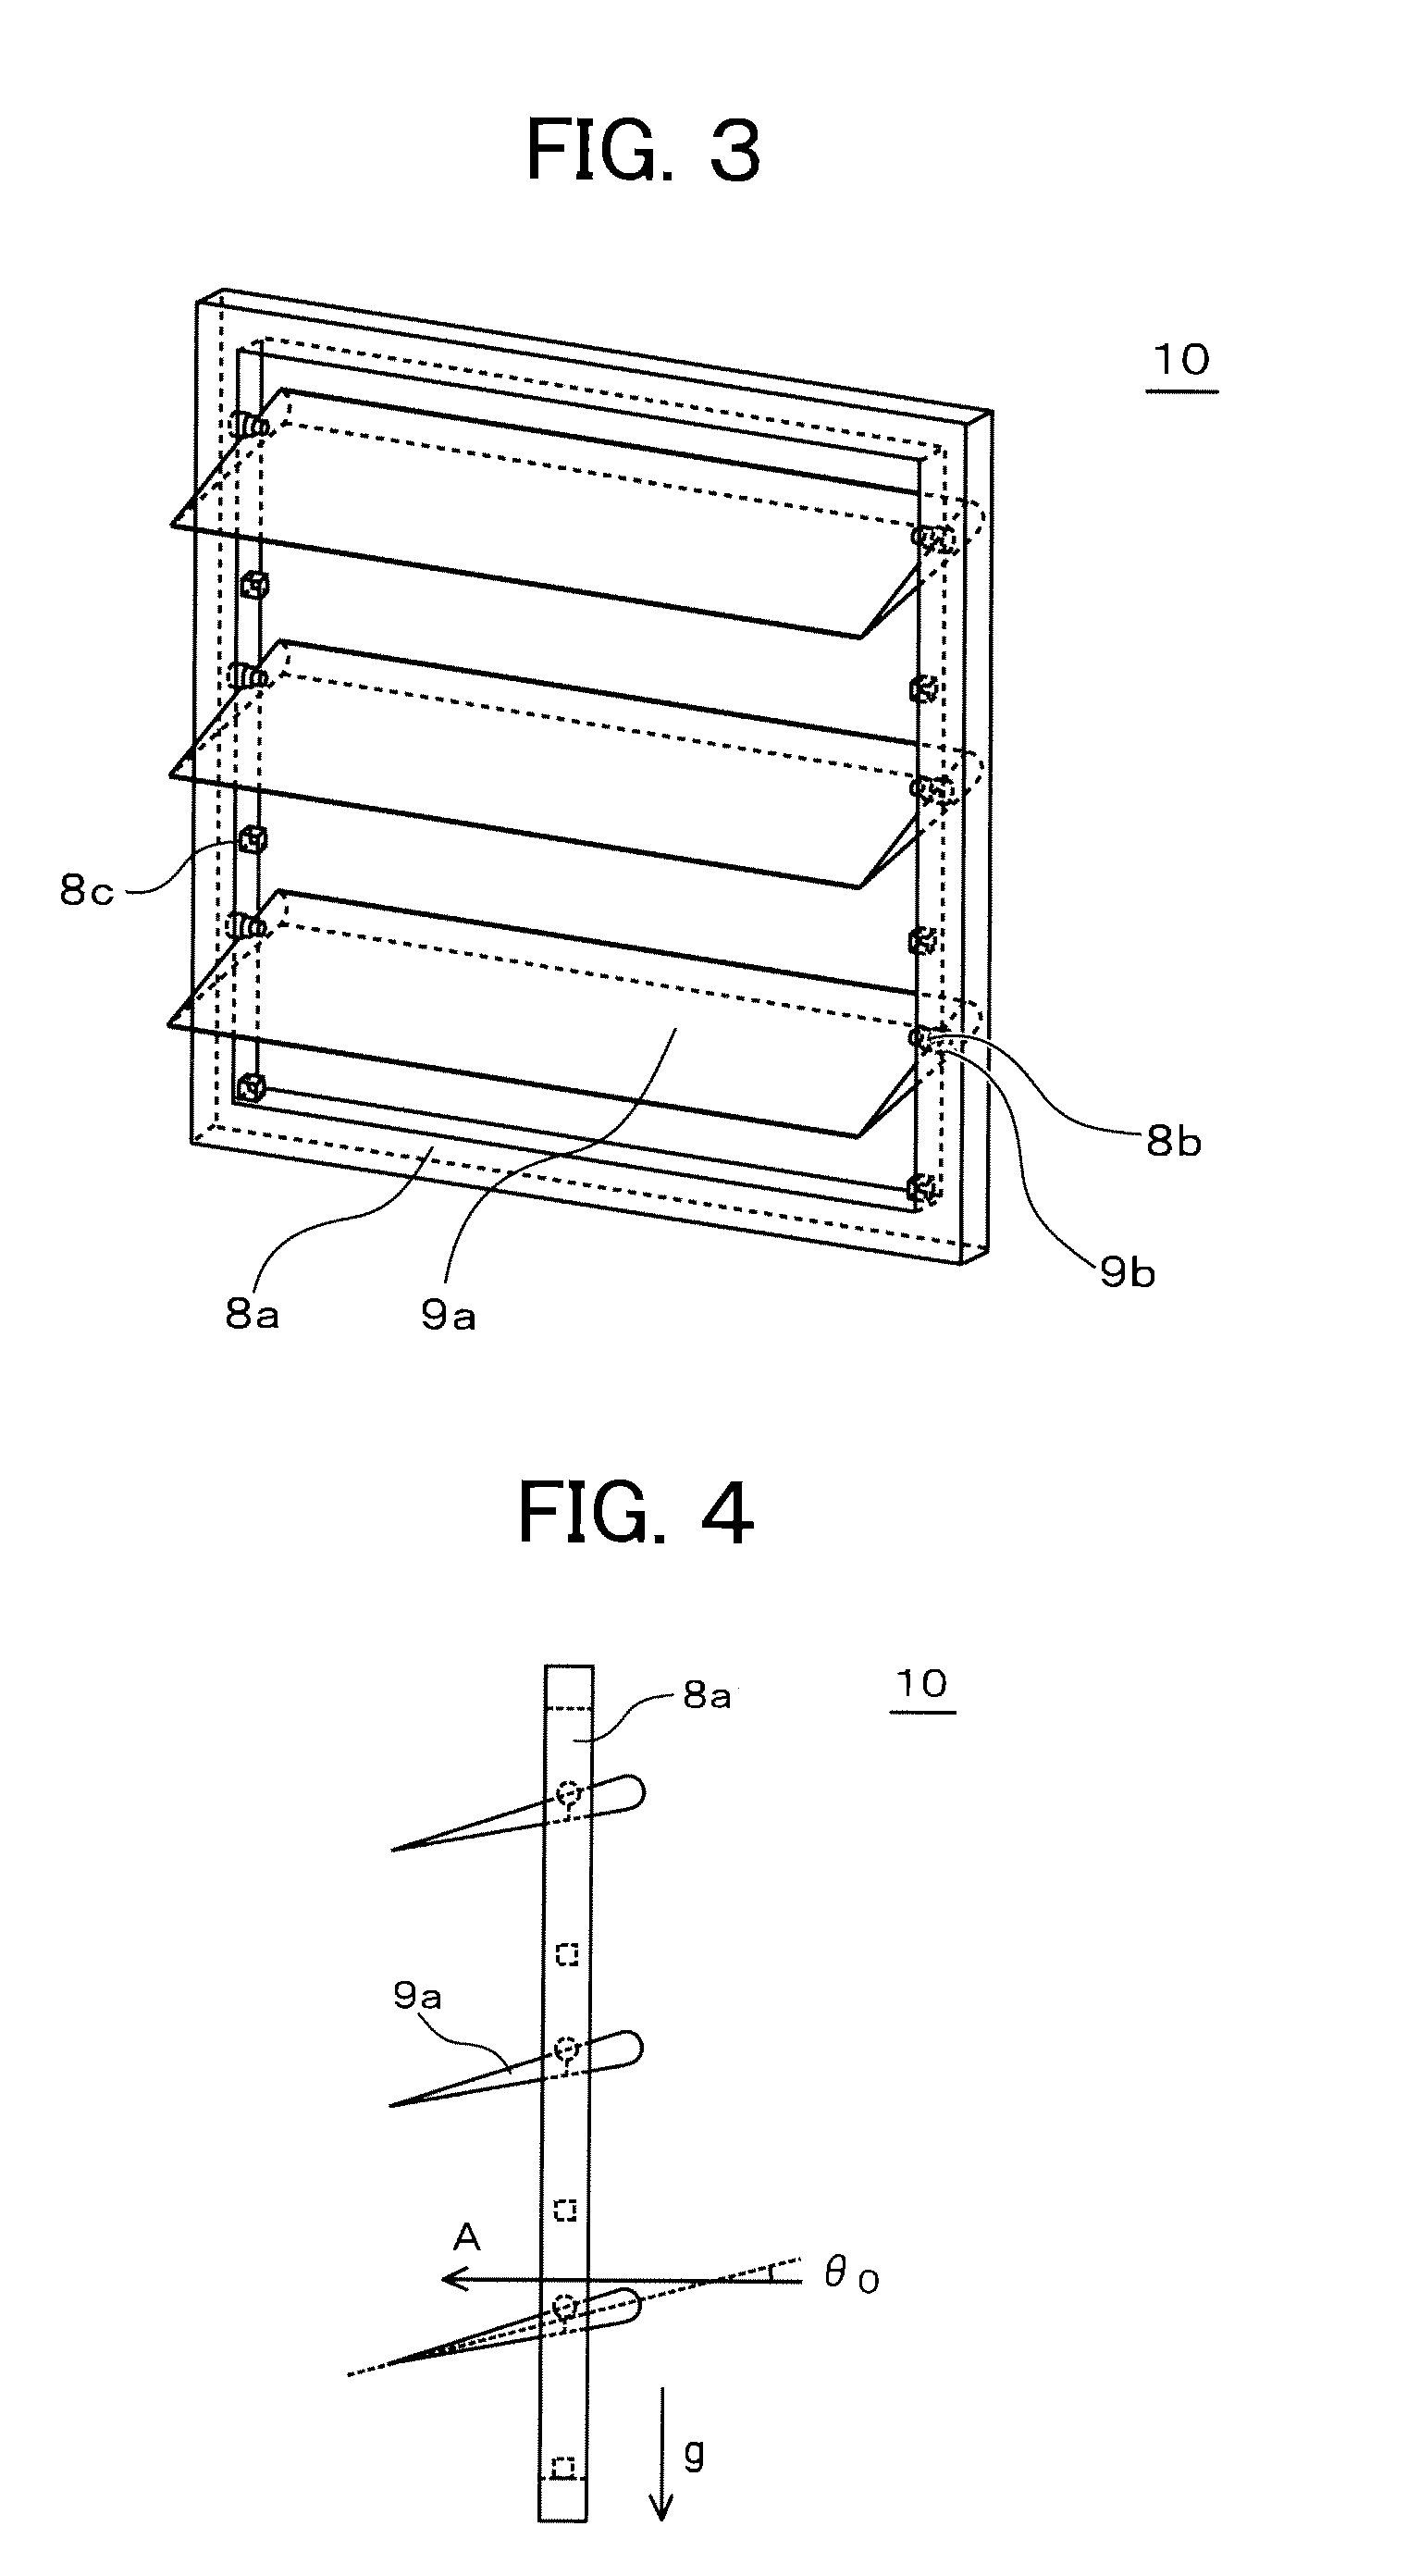 Wind-pressure shutter and cooling fan system